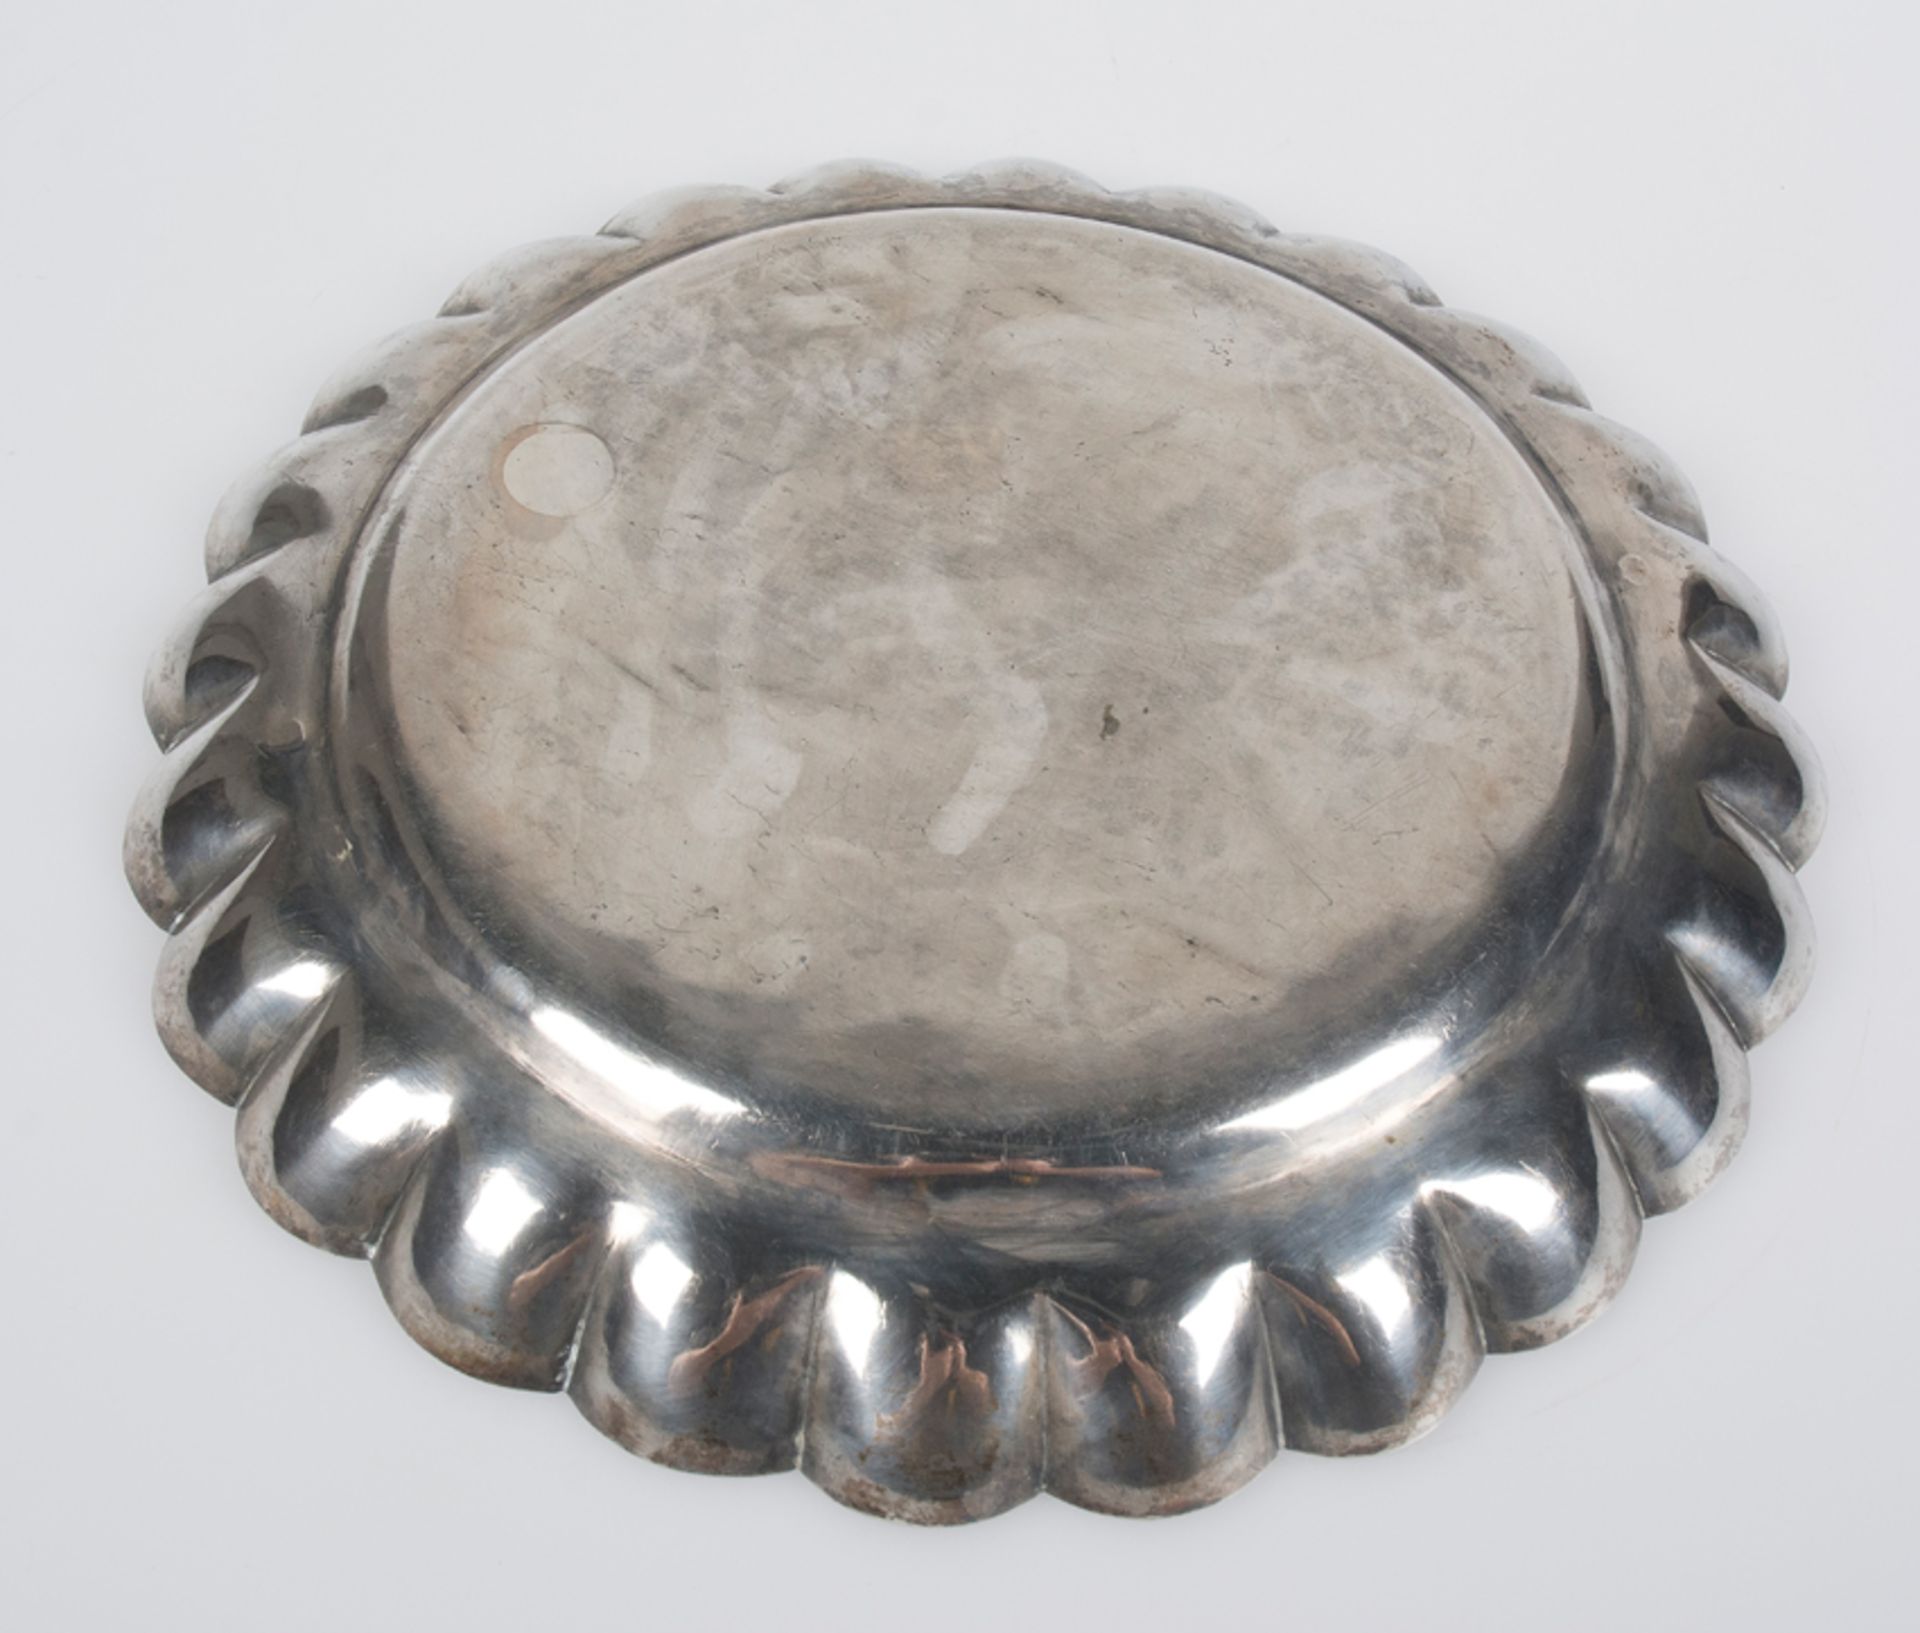 Large silver plate. Colonial work. Possibly Guatemala or Leon, Nicaragua. 18th century. - Bild 4 aus 6